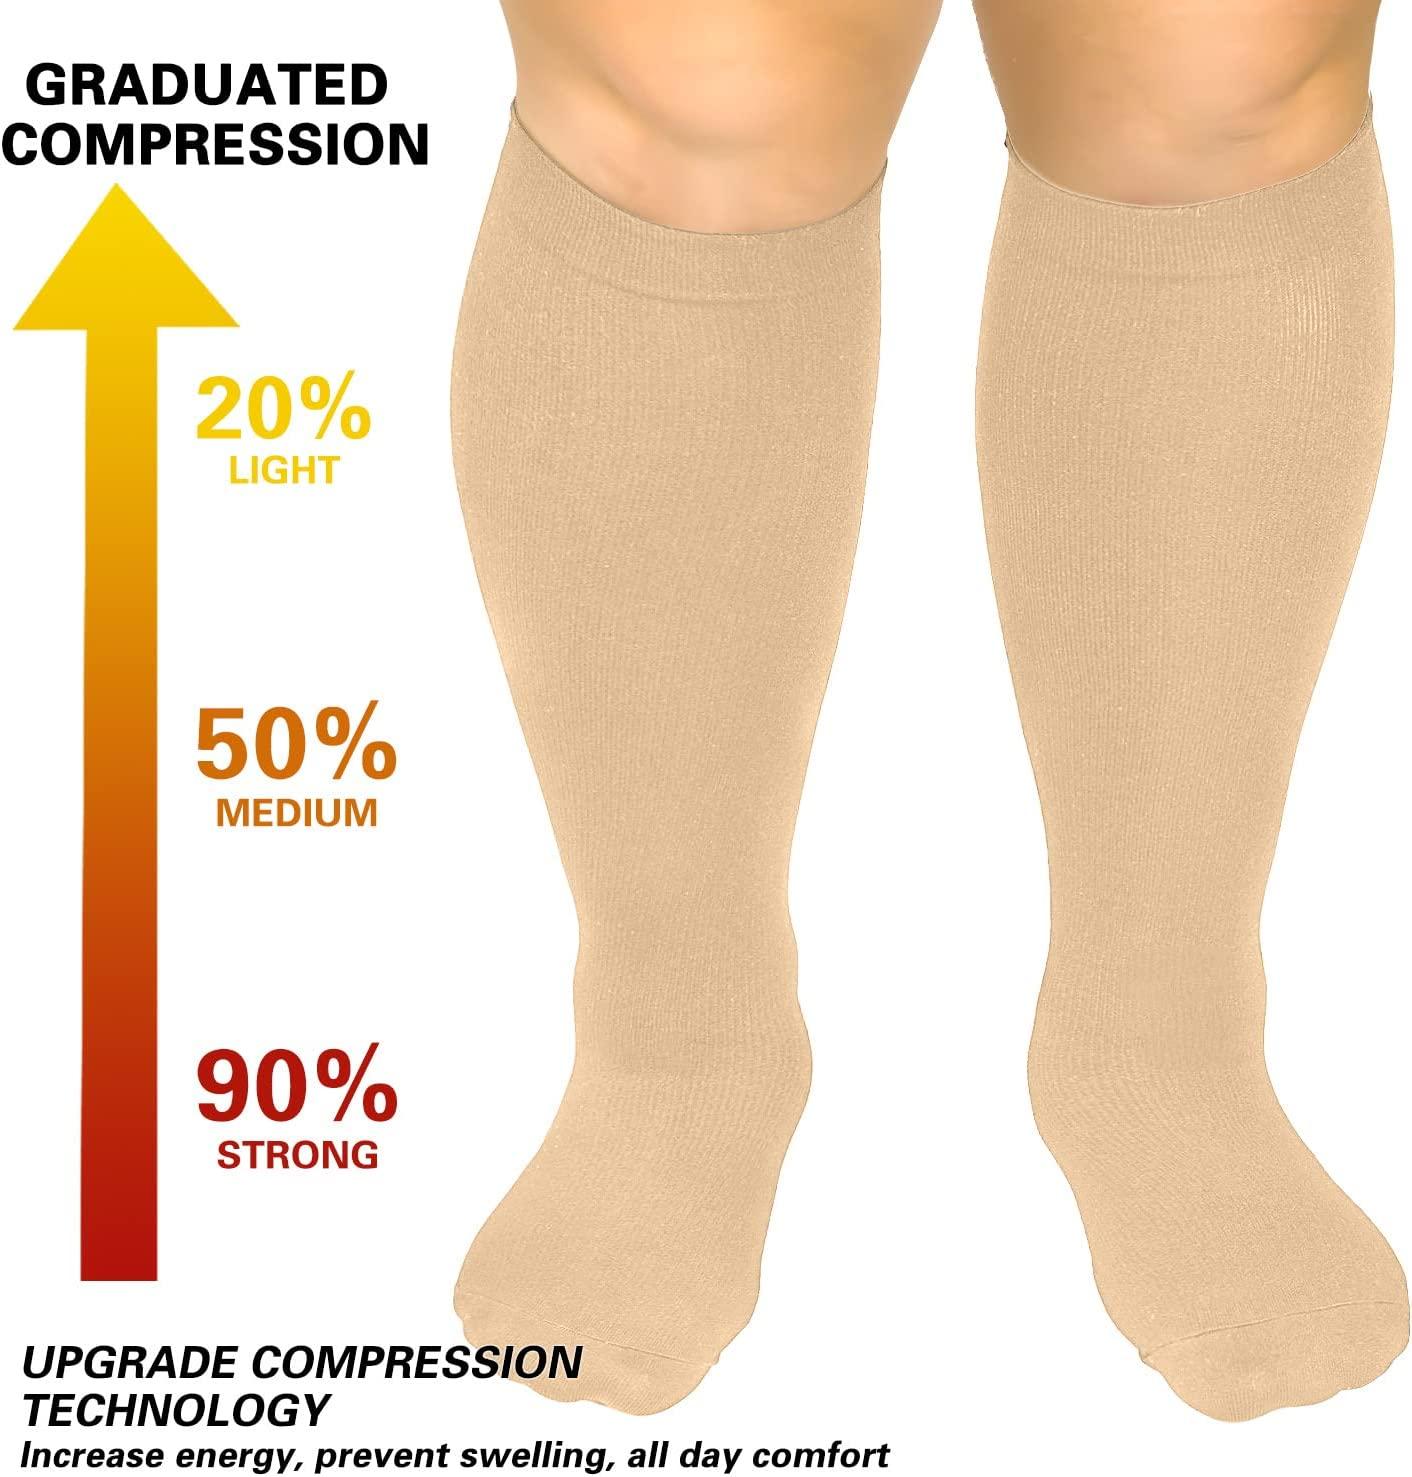 3 Pack Plus Size Compression Socks for Women and Men, 20-30 mmHg